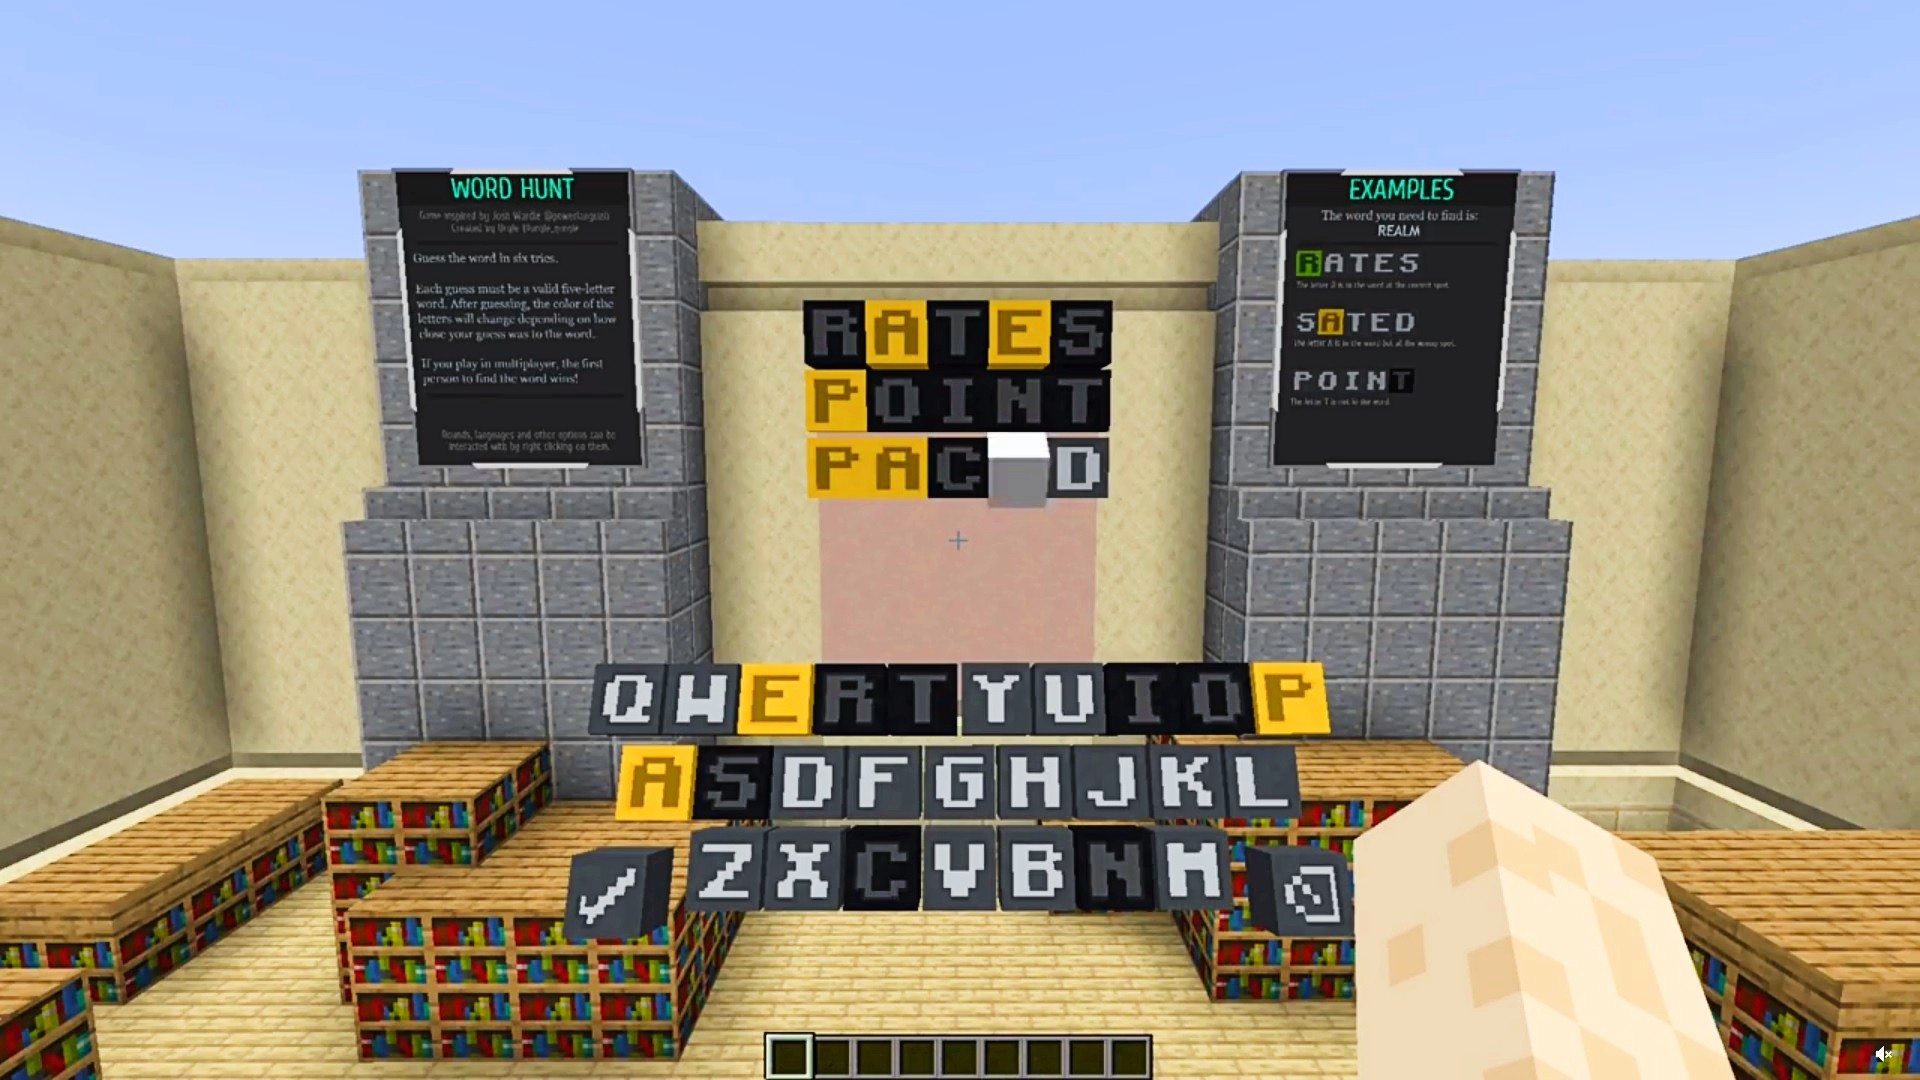 This Minecraft build is fully functional Wordle